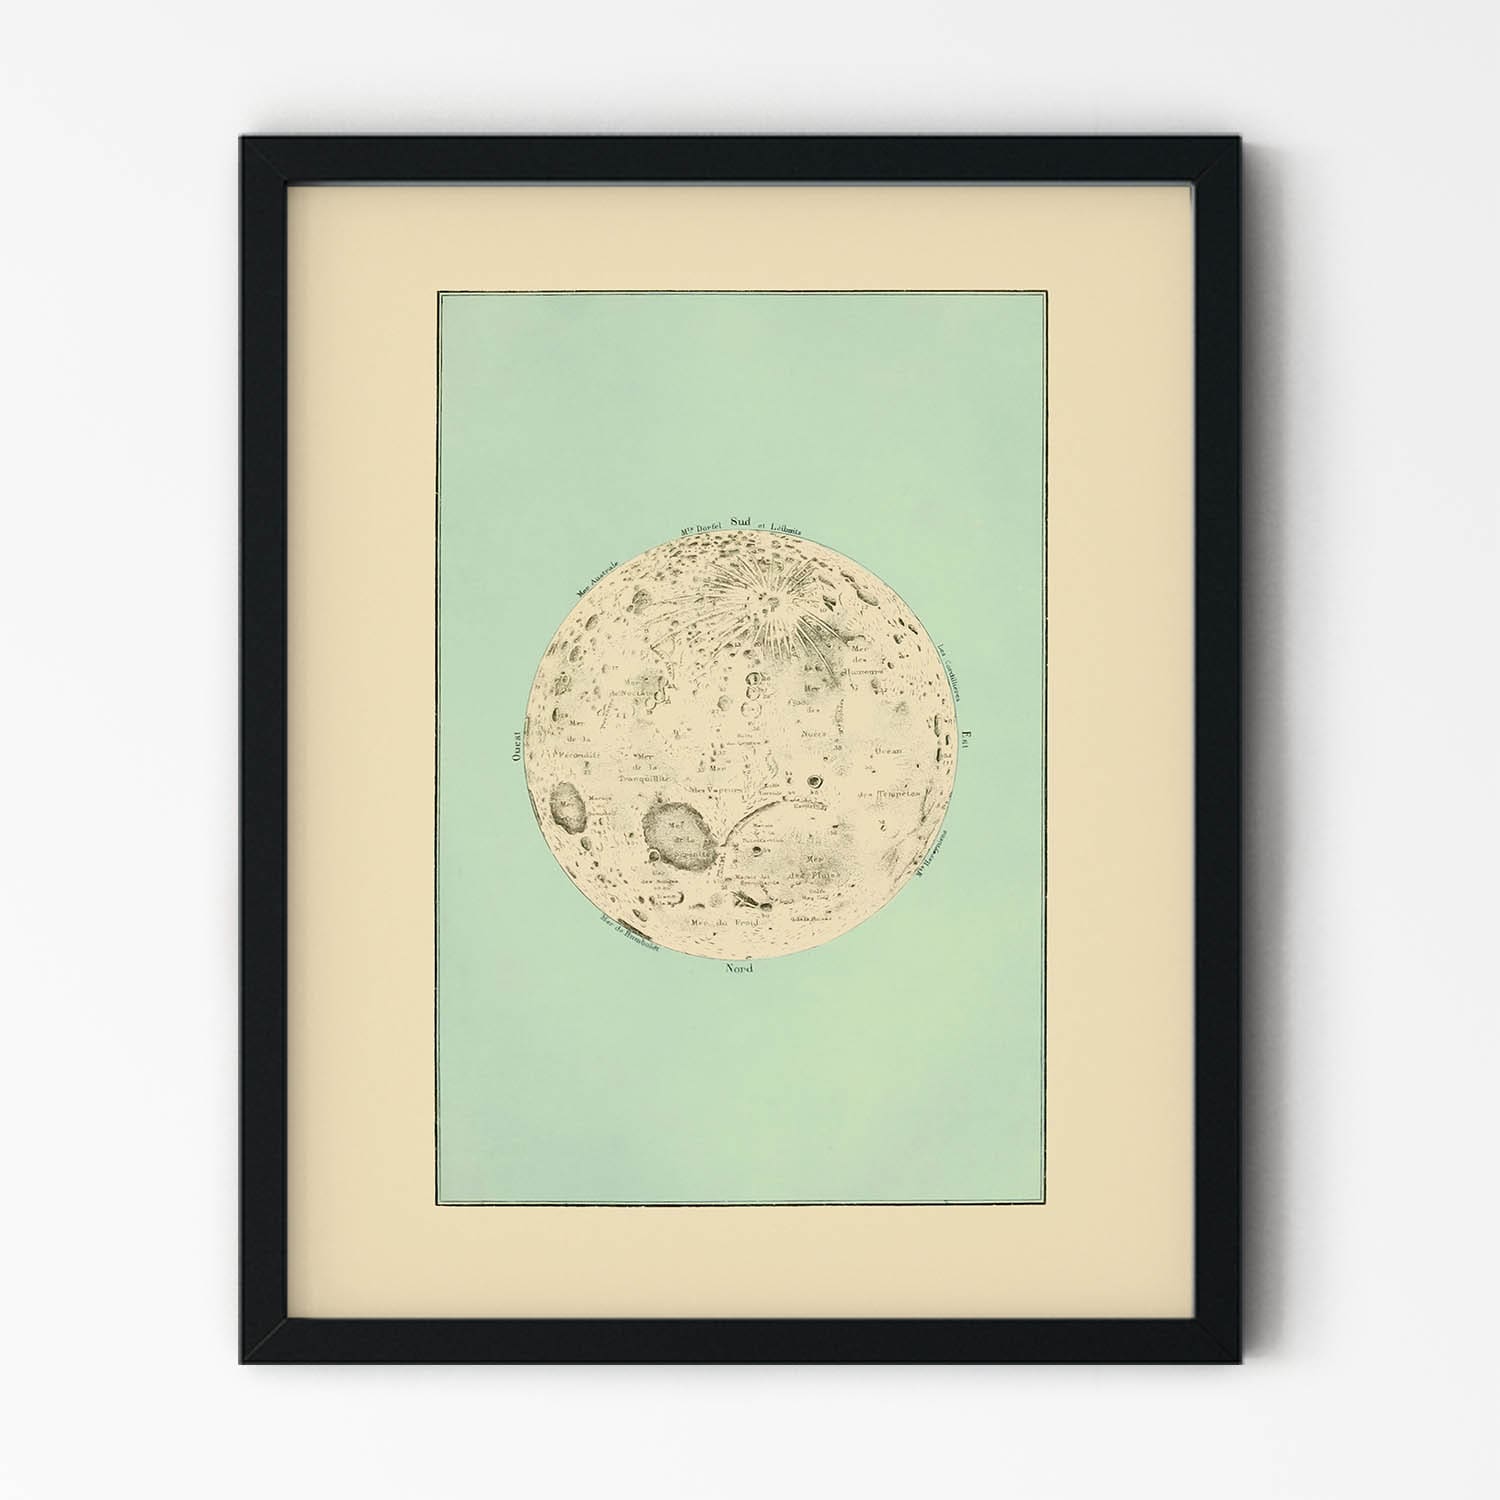 Teal Moon Art Print in Black Picture Frame